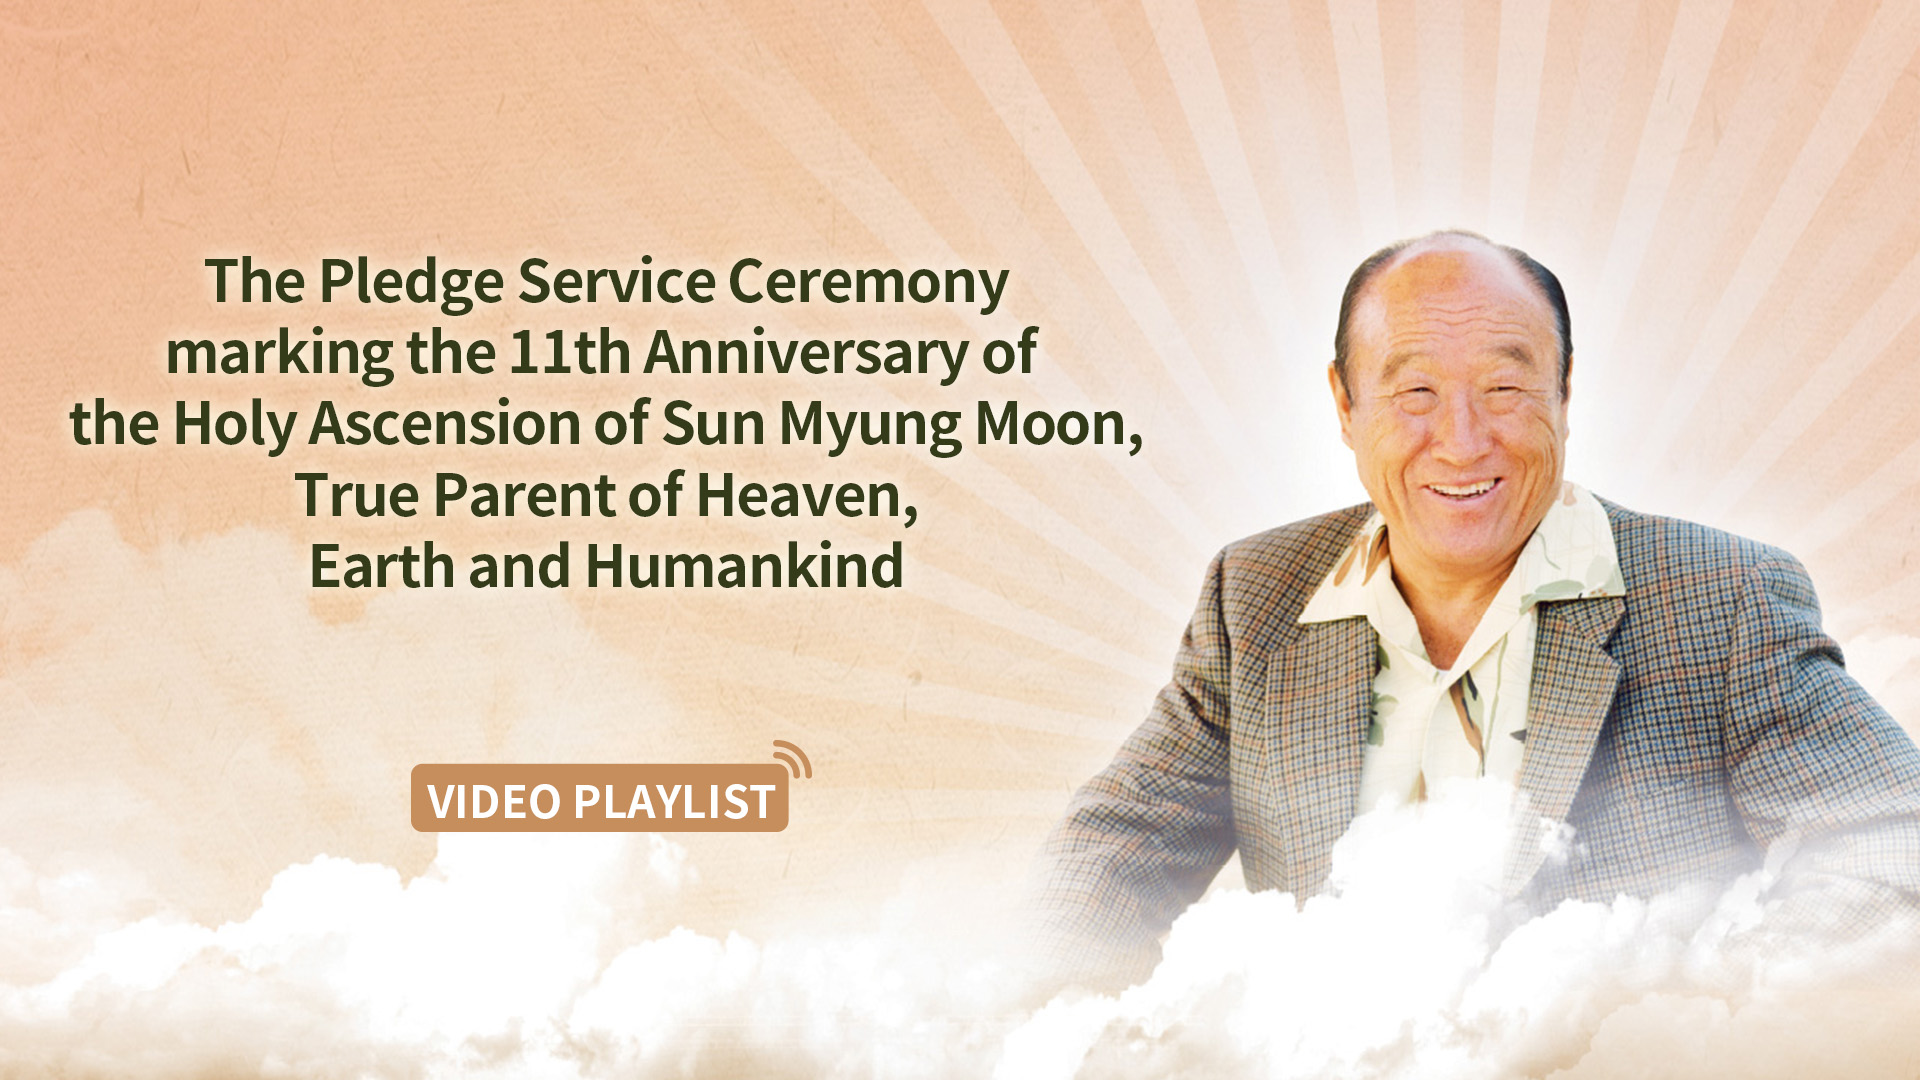 The Pledge Service Ceremony marking the 11th Anniversary of the Holy Ascension of Sun Myung Moon